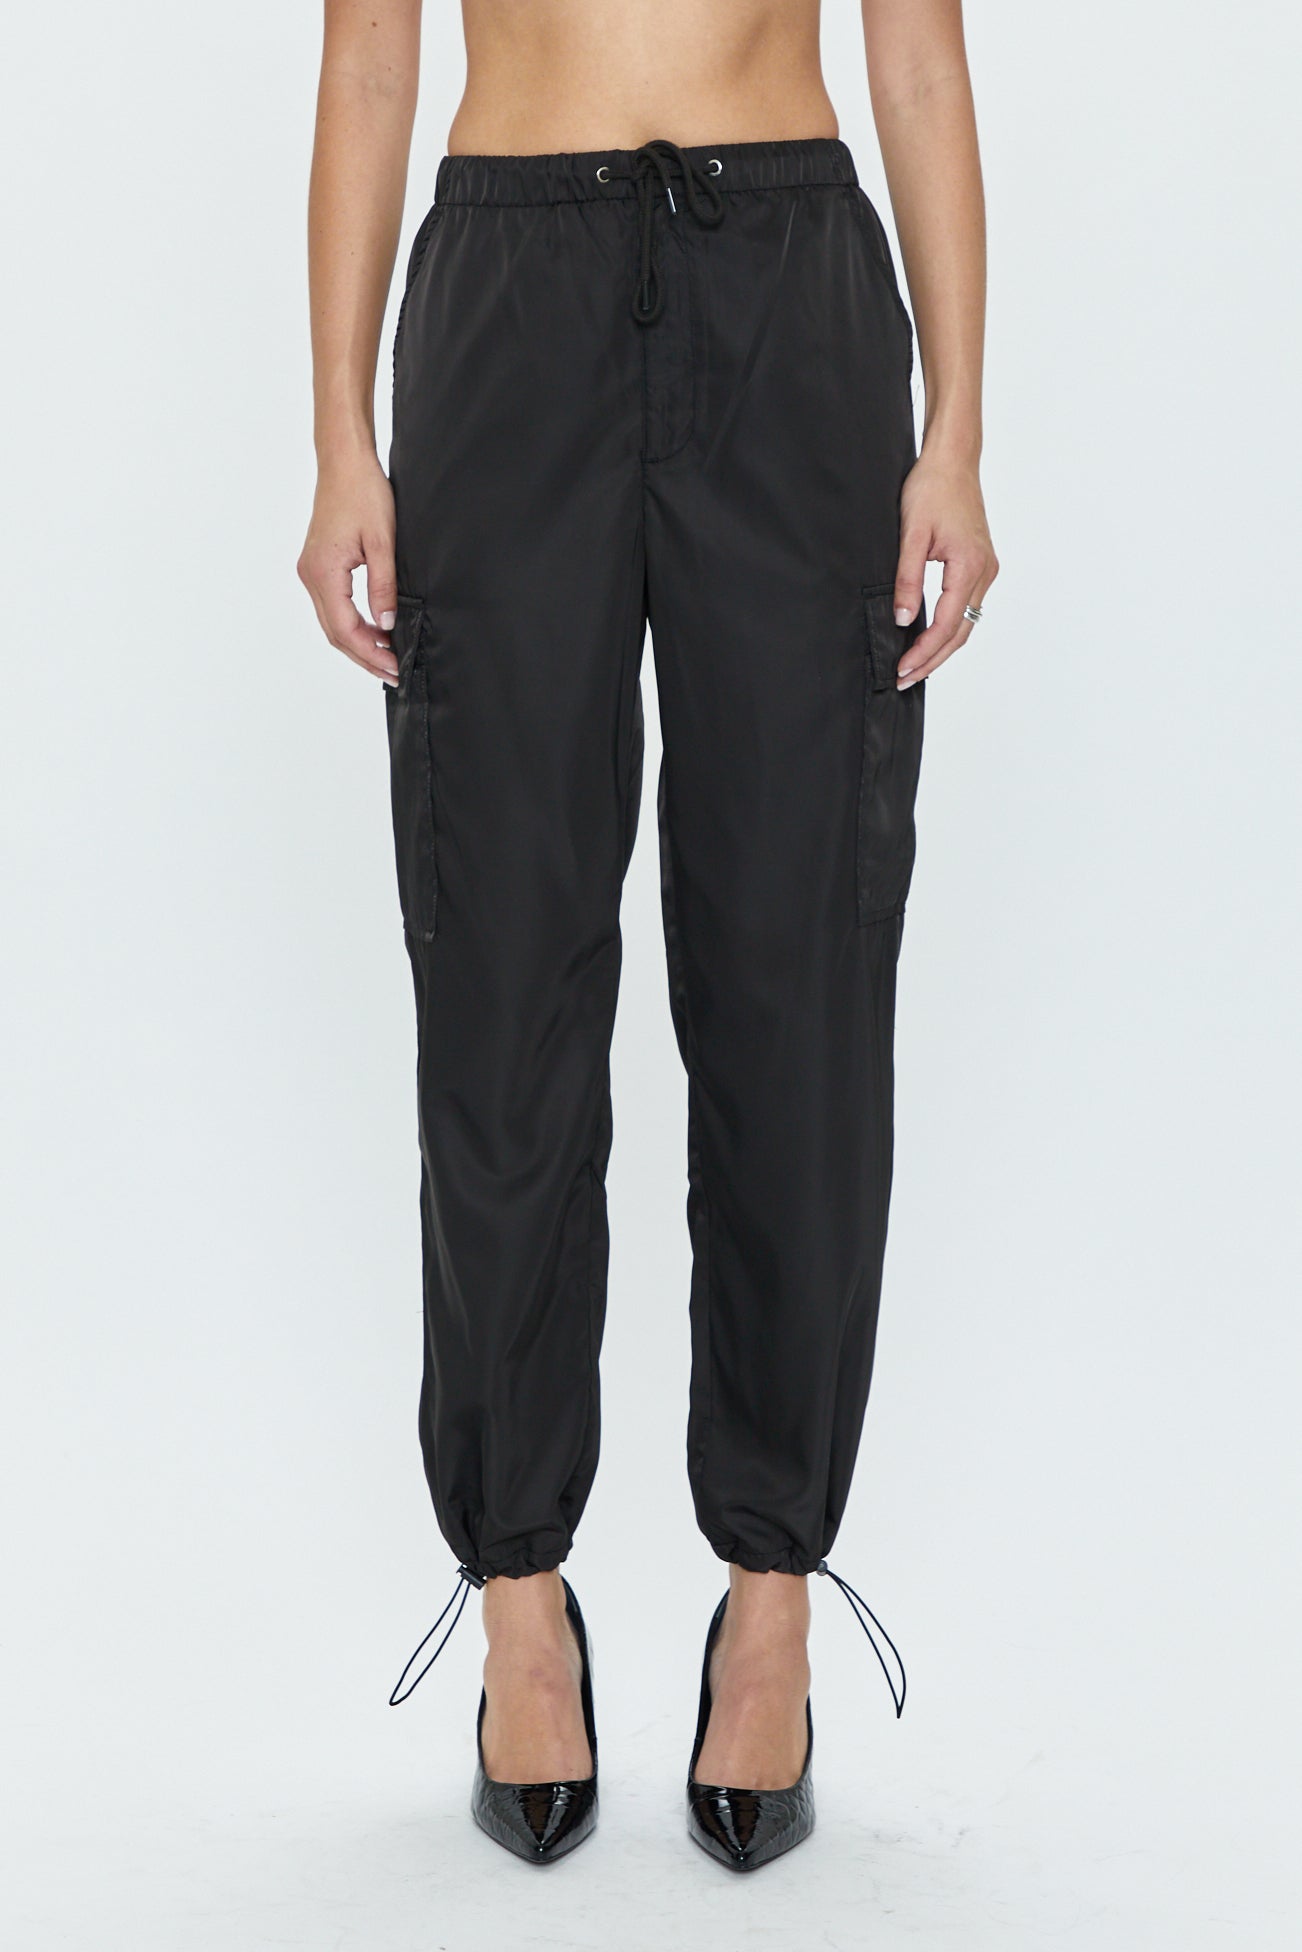 Cargo pants | Bottom-wear | The Seed Store